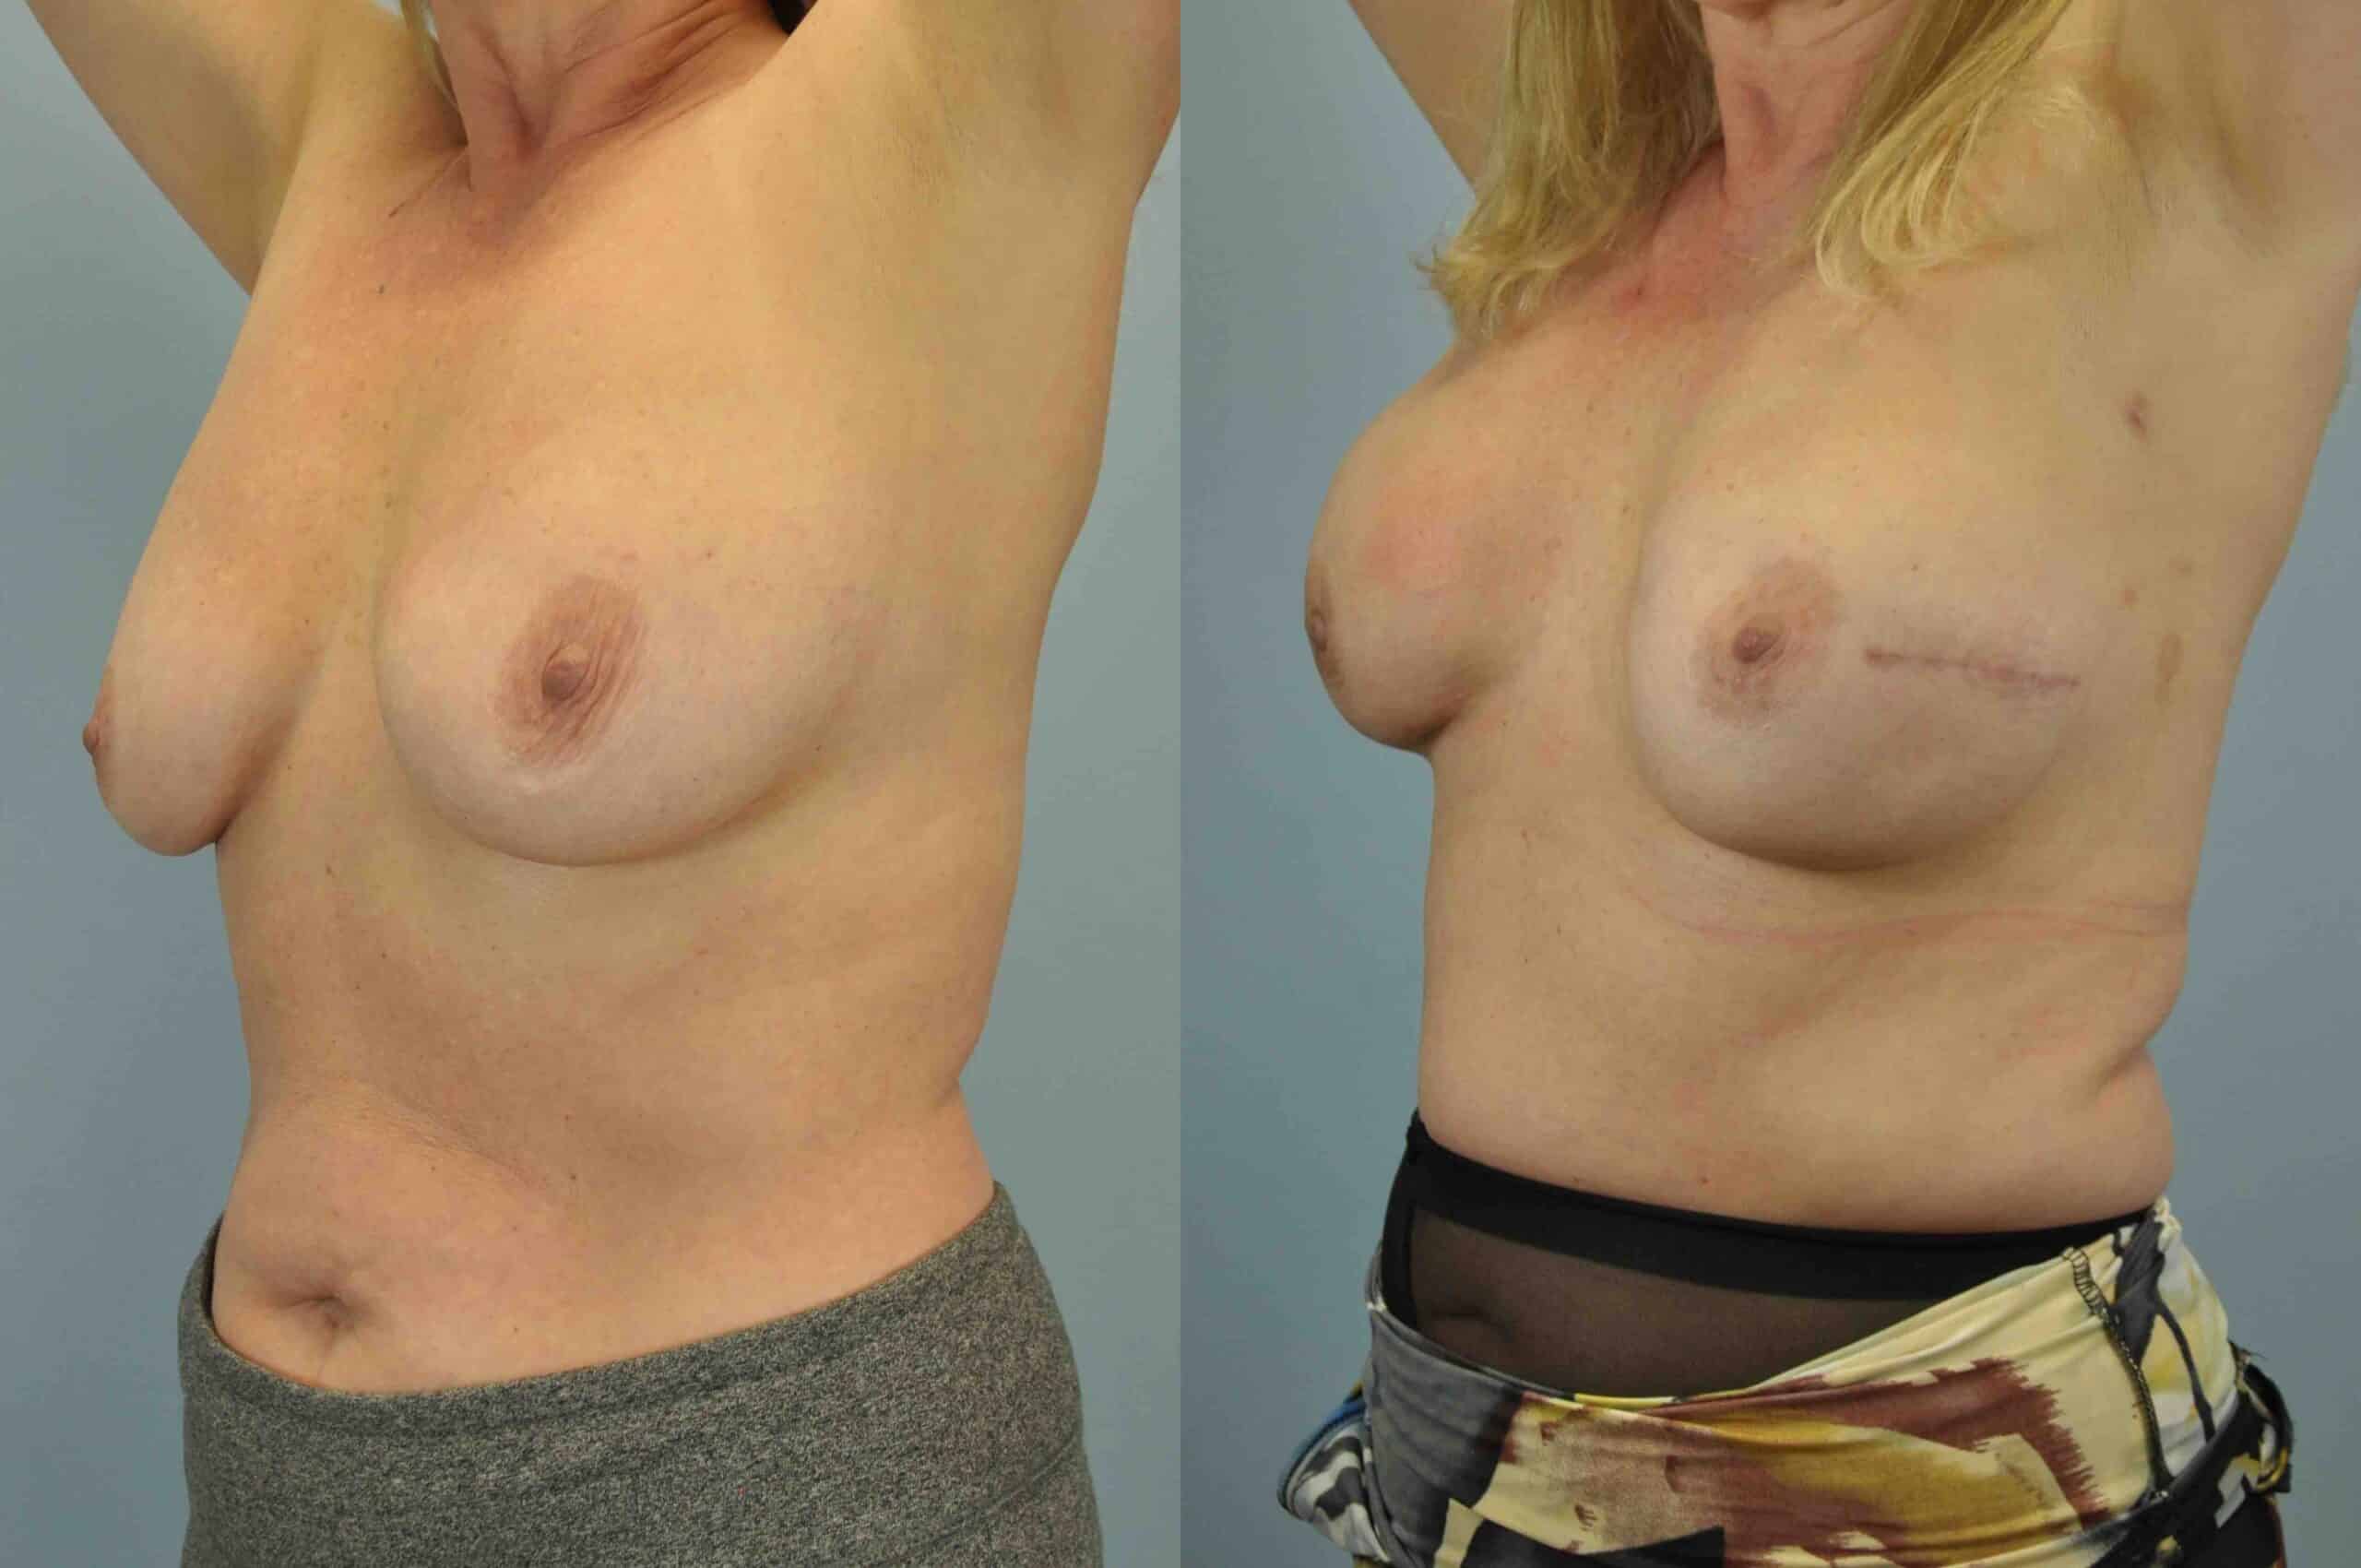 Before and after, 3 mo post op from Single-Stage Breast Reconstruction with Implant, B/L Nipple-Sparing Mastectomy, Alloderm performed by Dr. Paul Vanek (diagonal view)